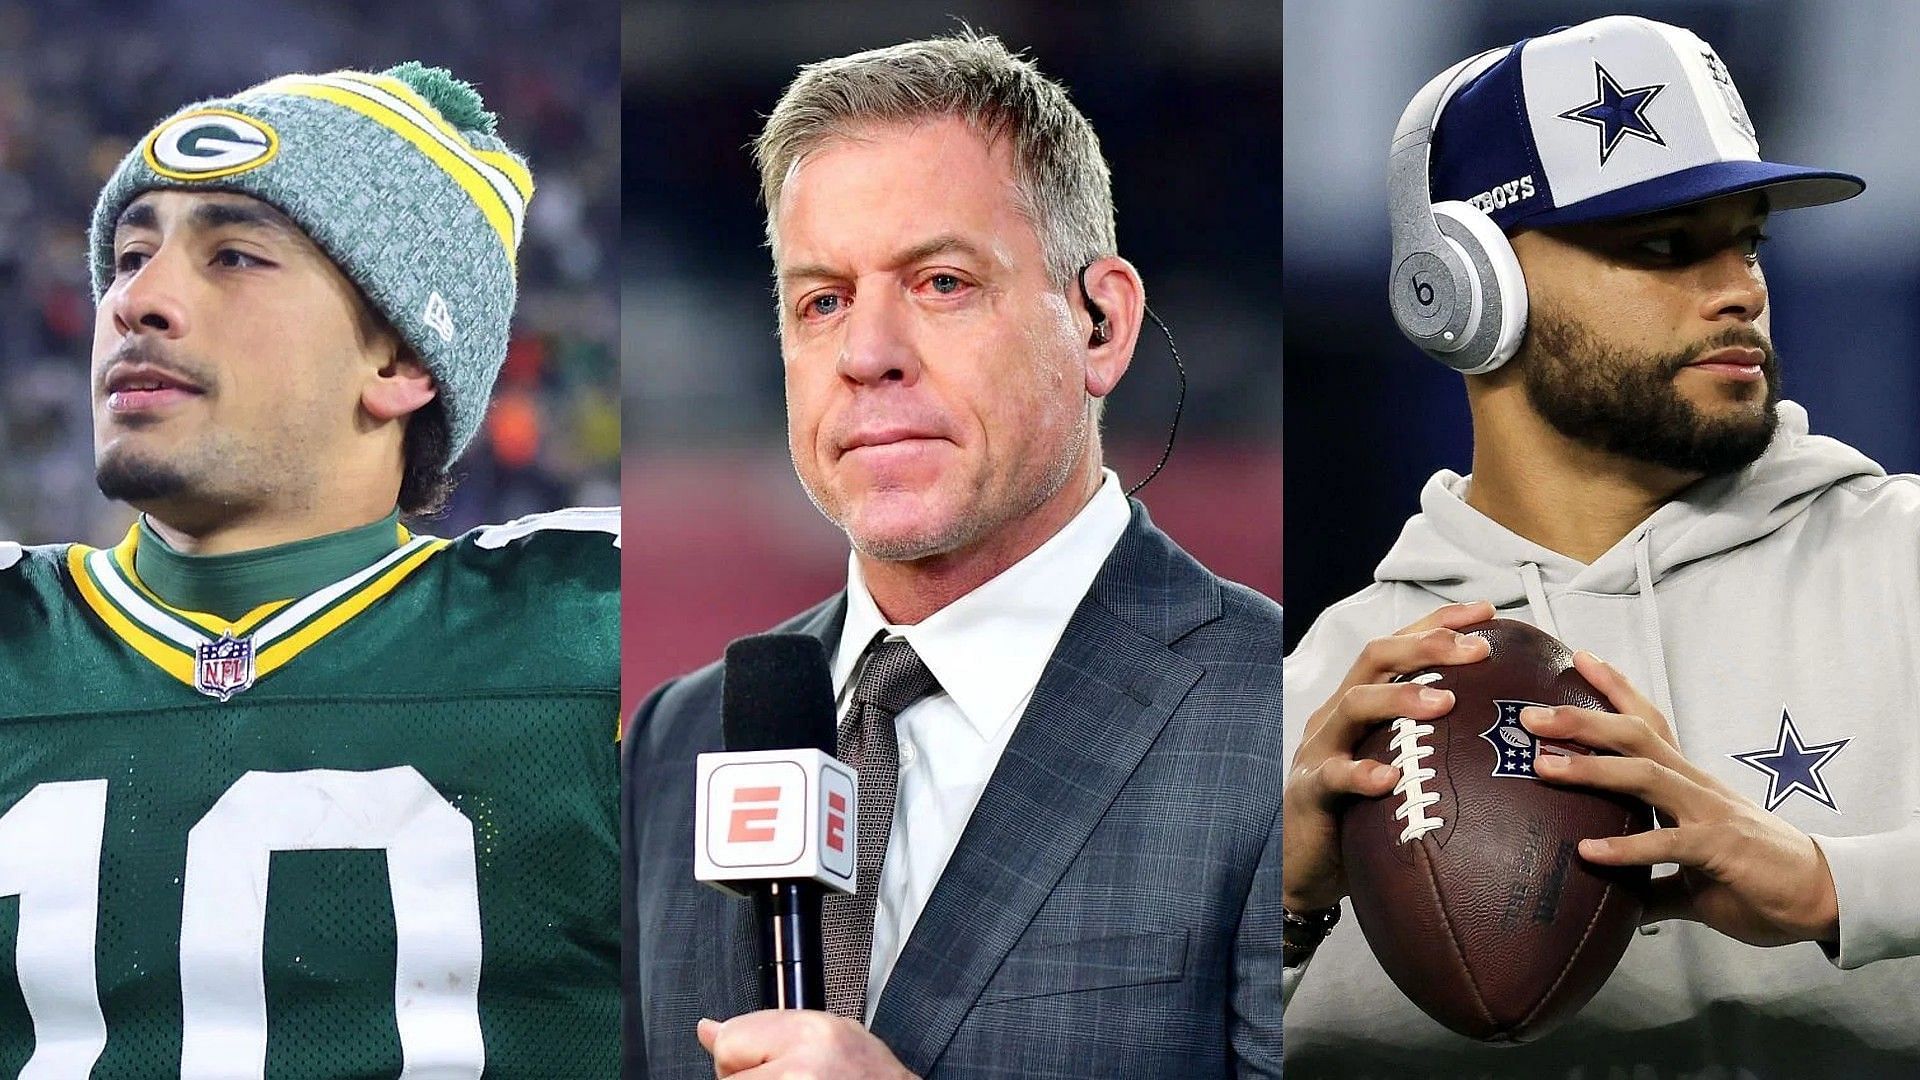 Cowboys legend Troy Aikman drops key for Jordan Love and Packers to pull upset on Dallas